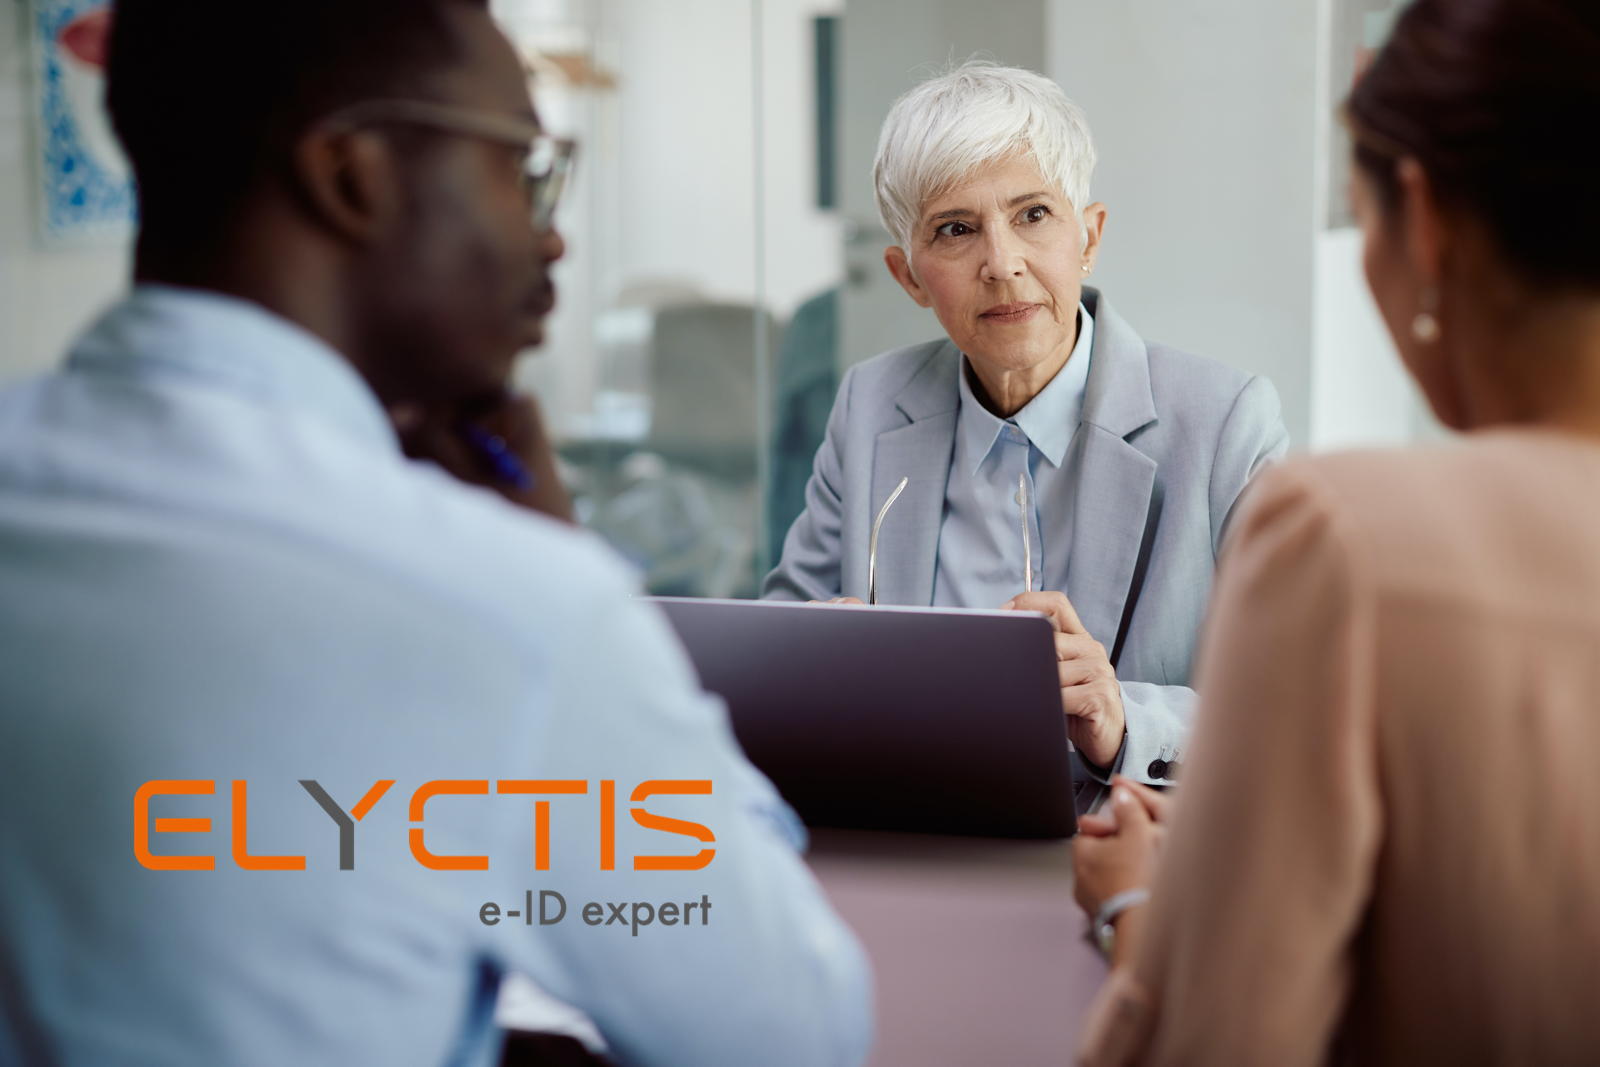 Bank branch KYC gets the right solution with Elyctis new ID BOX – ID1 series